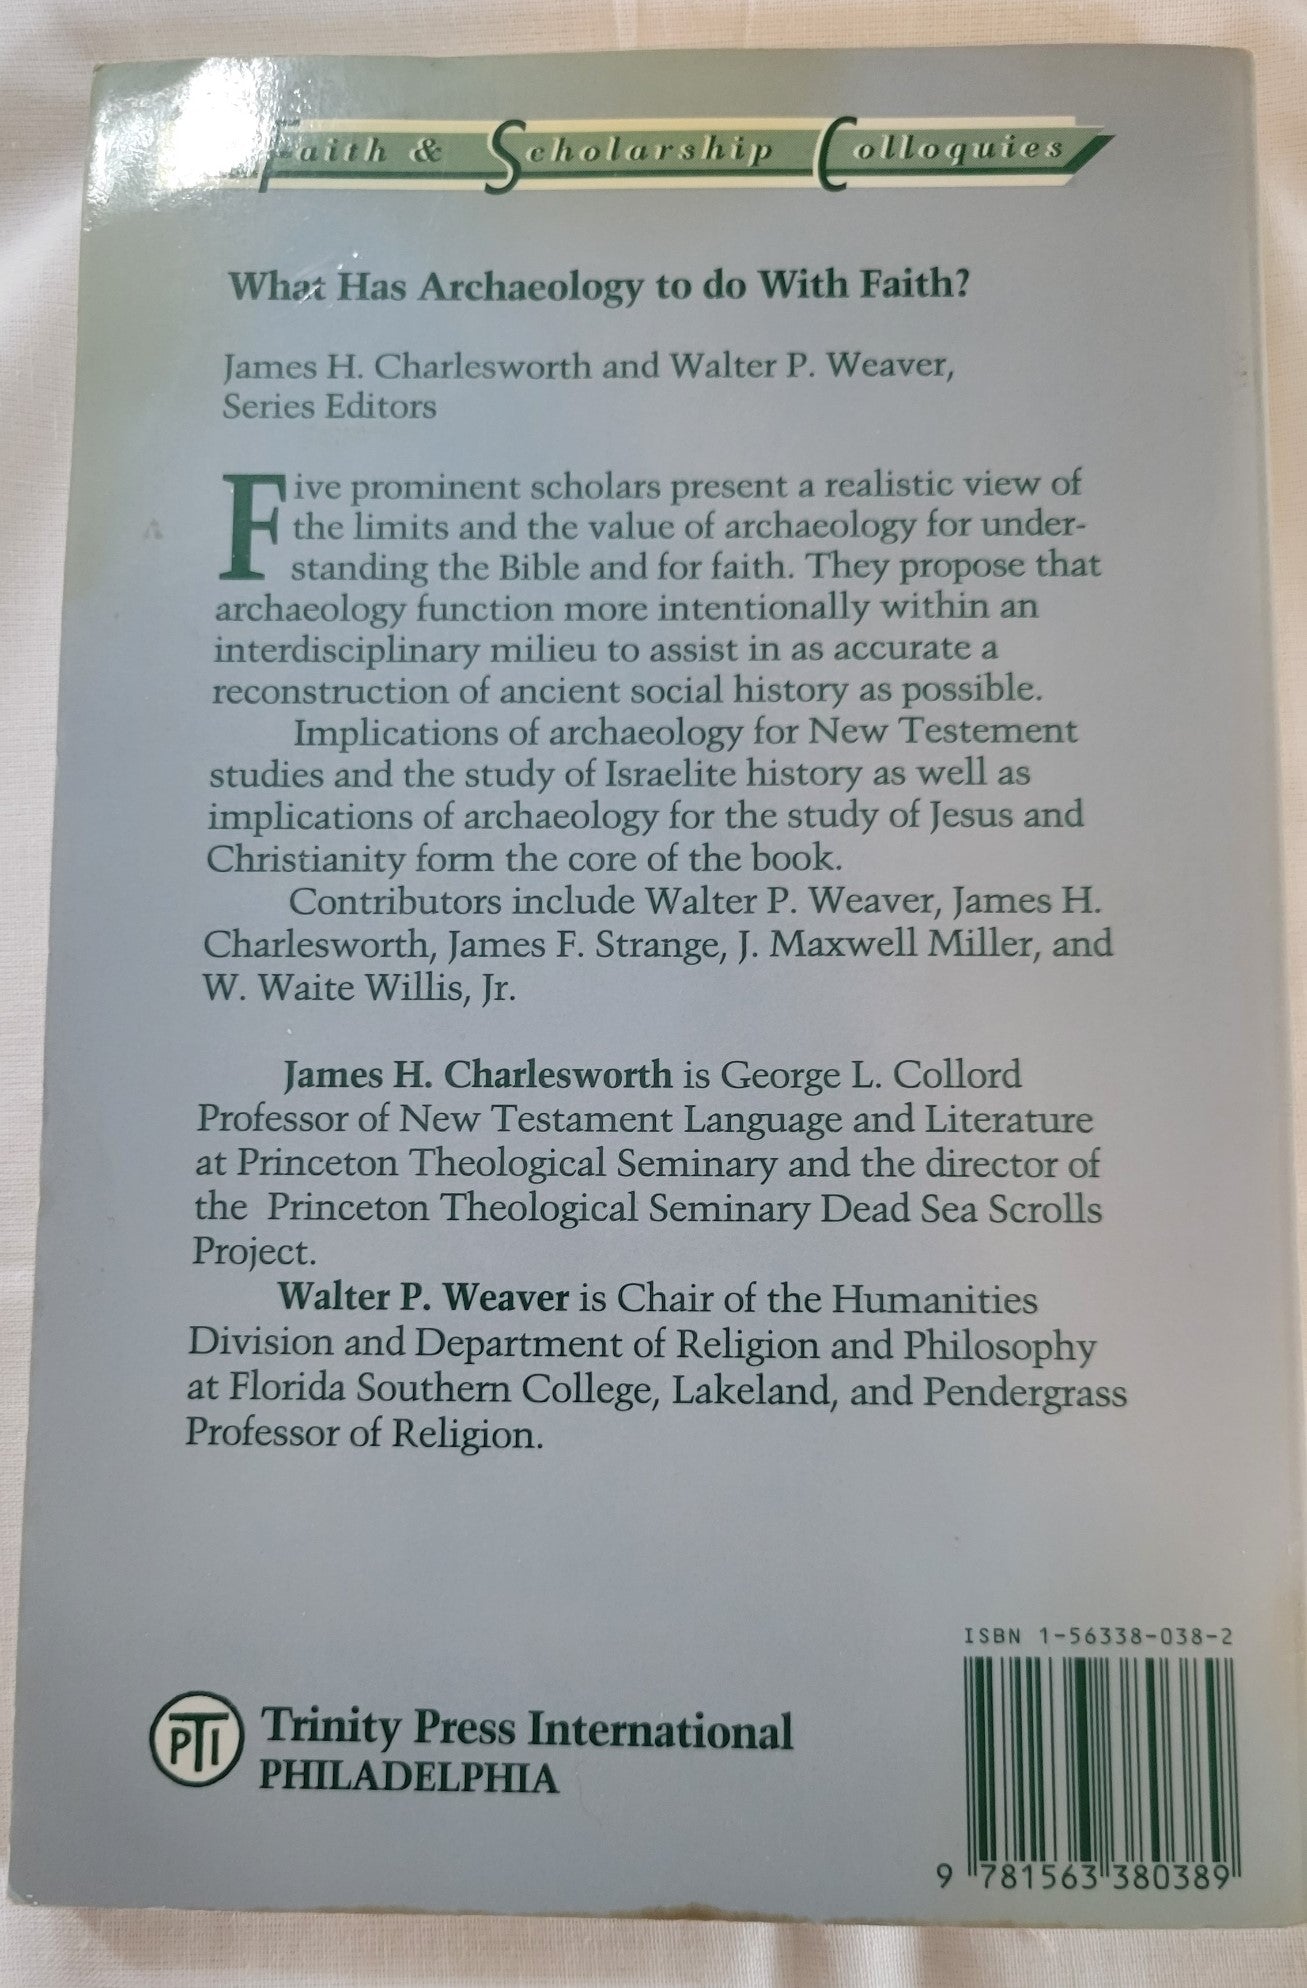 Used book for sale “What Has Archaeology to do with Faith?” edited by James H. Charlesworth and Walter P. Weaver. Back cover.